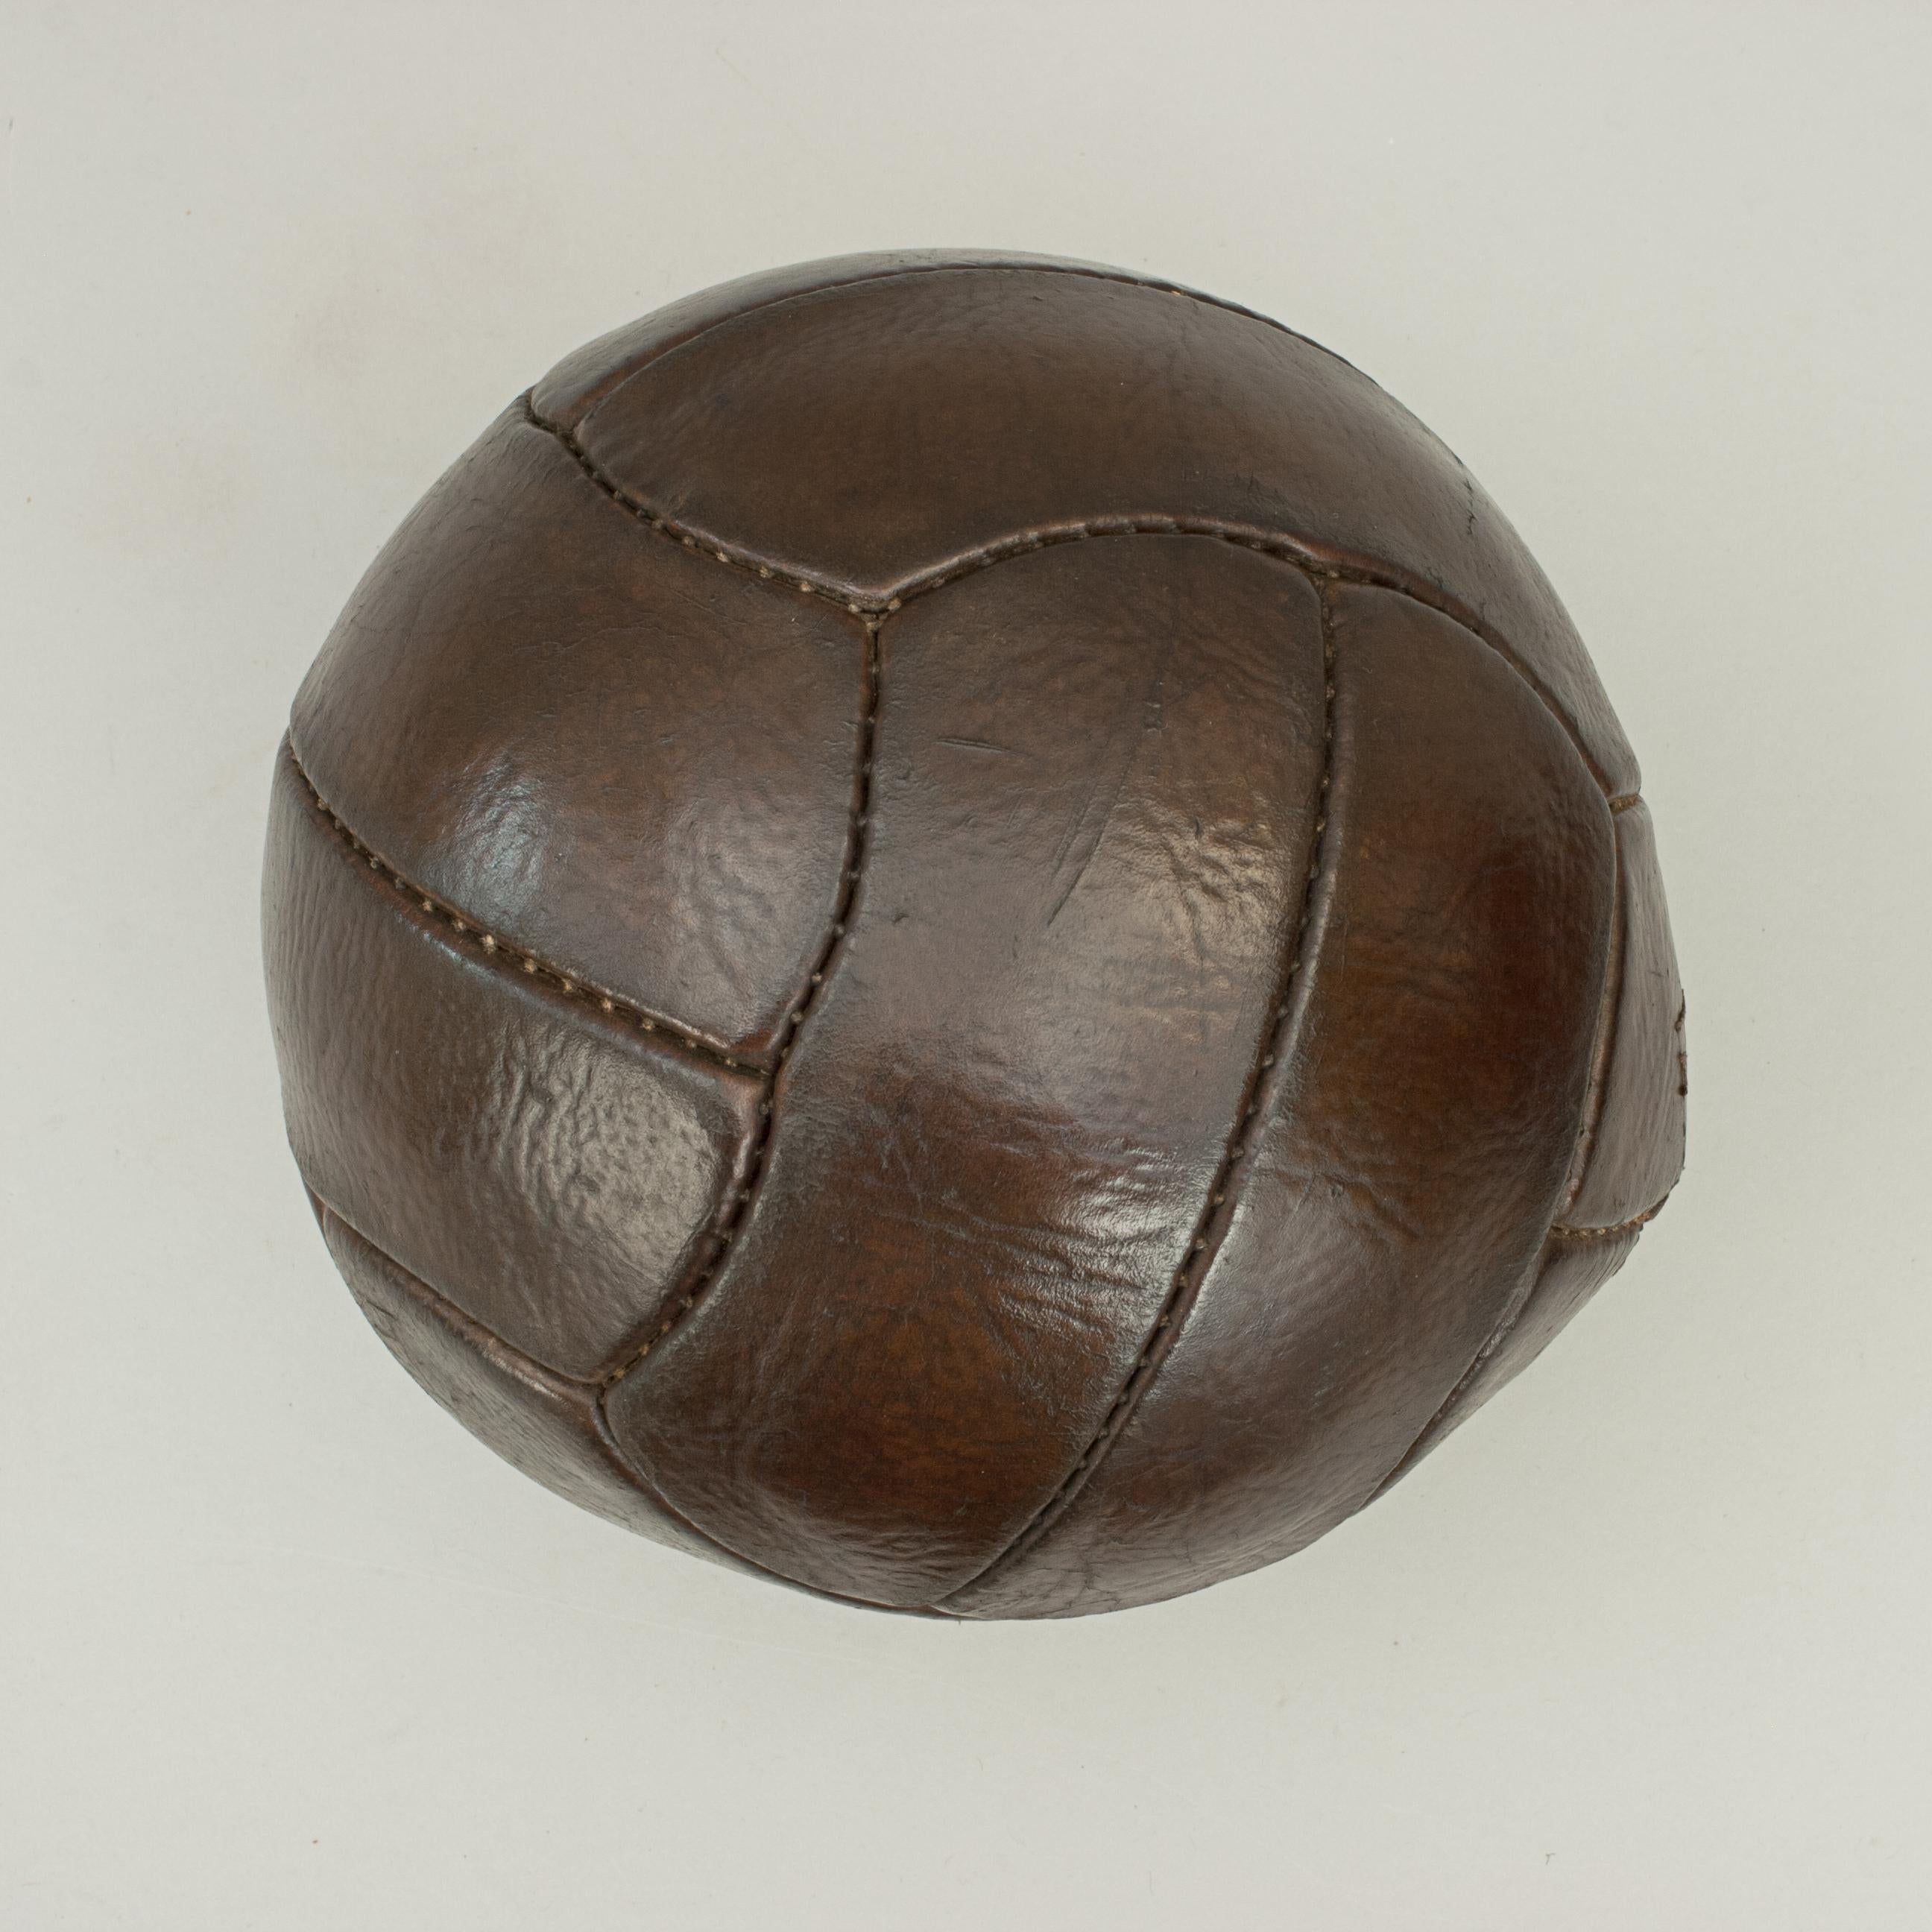 SPAIN Vintage Leather Soccer Ball 1966 100% leather 